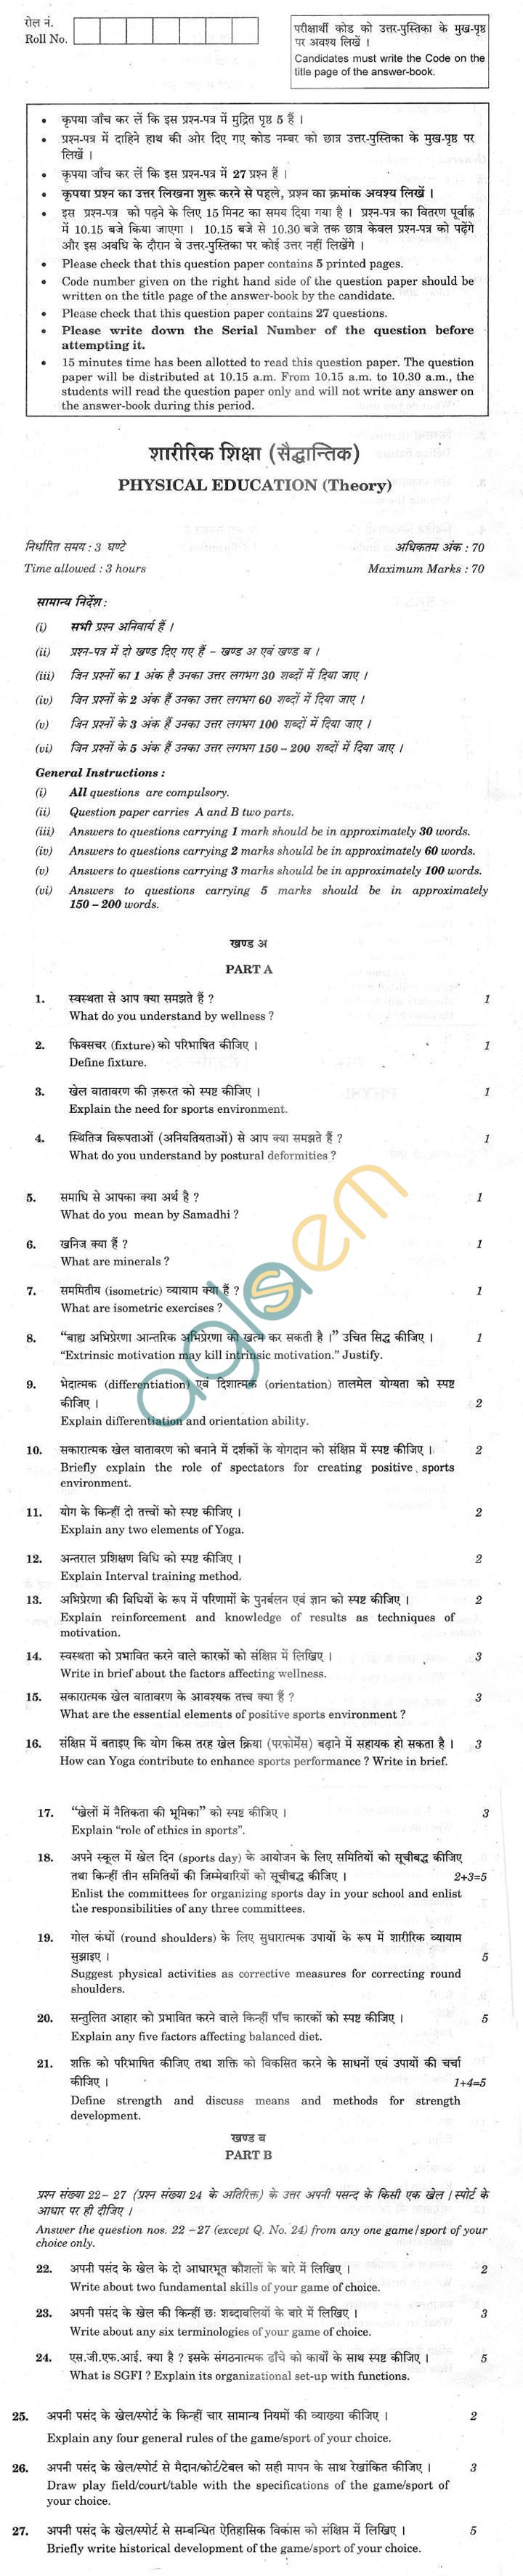 CBSE Compartment Exam 2013 Class XII Question Paper - Physical Education